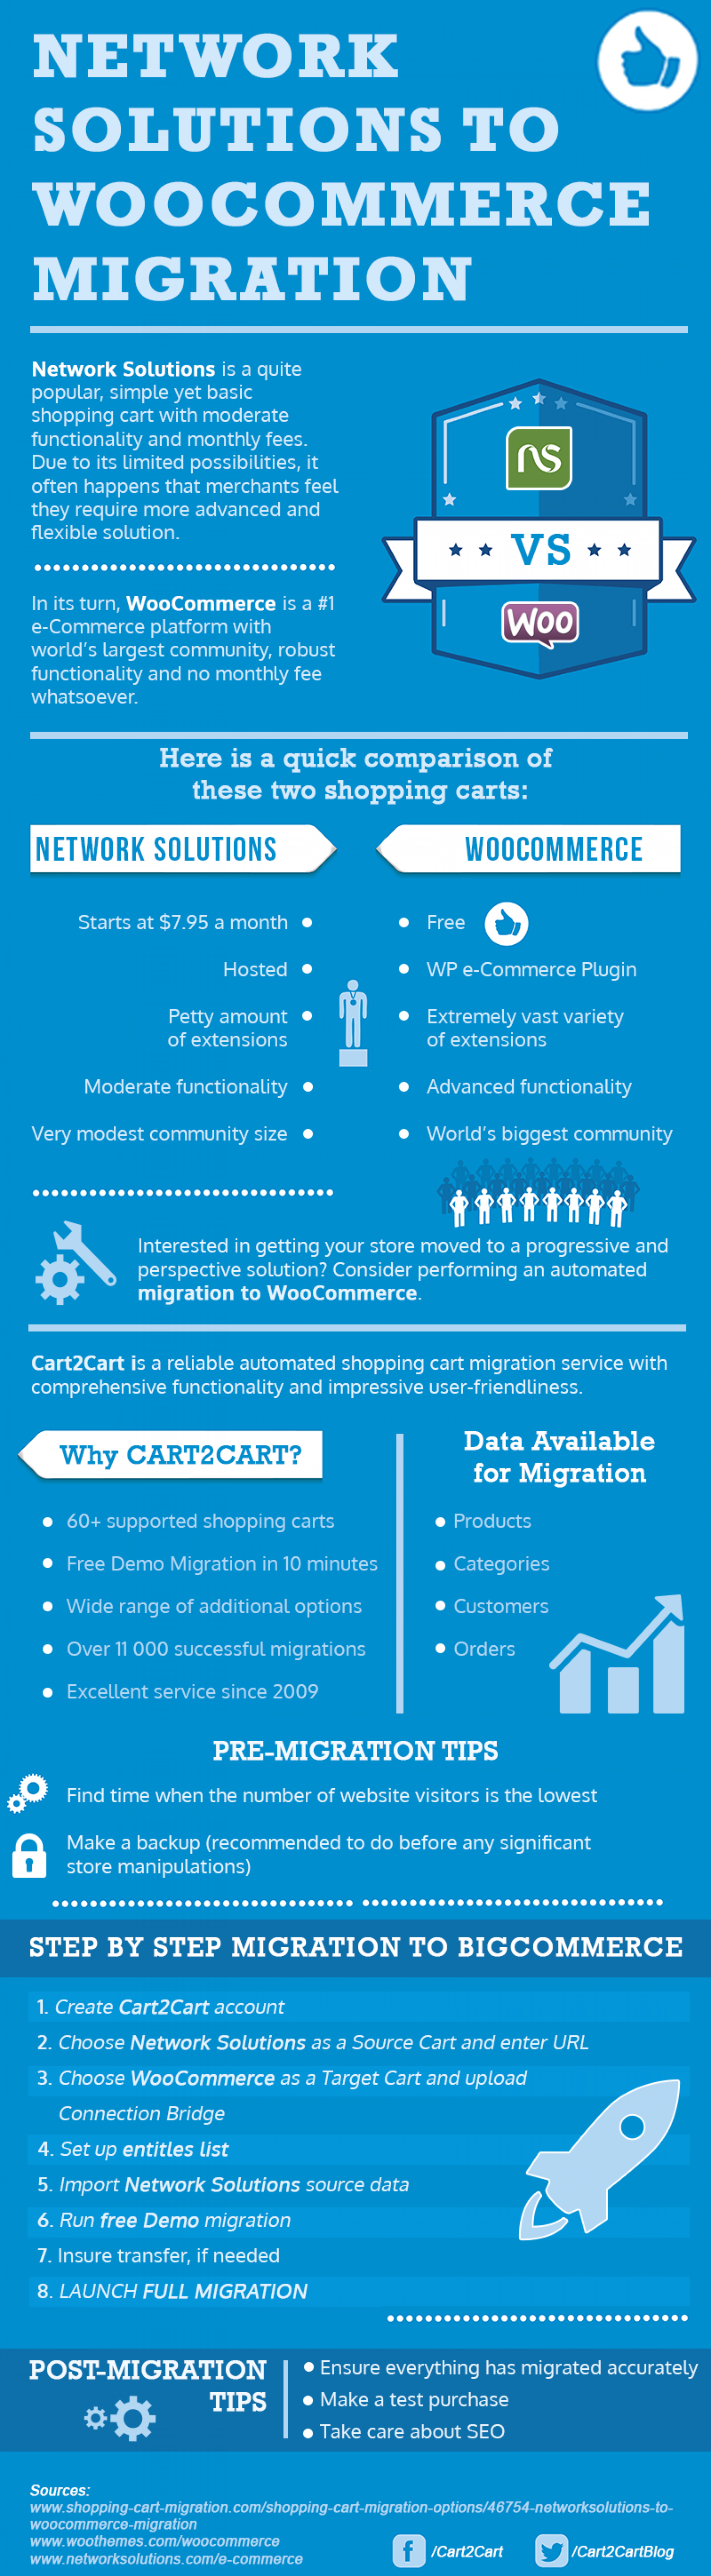 Automated Network Solutions to WooCommerce Migration Infographic